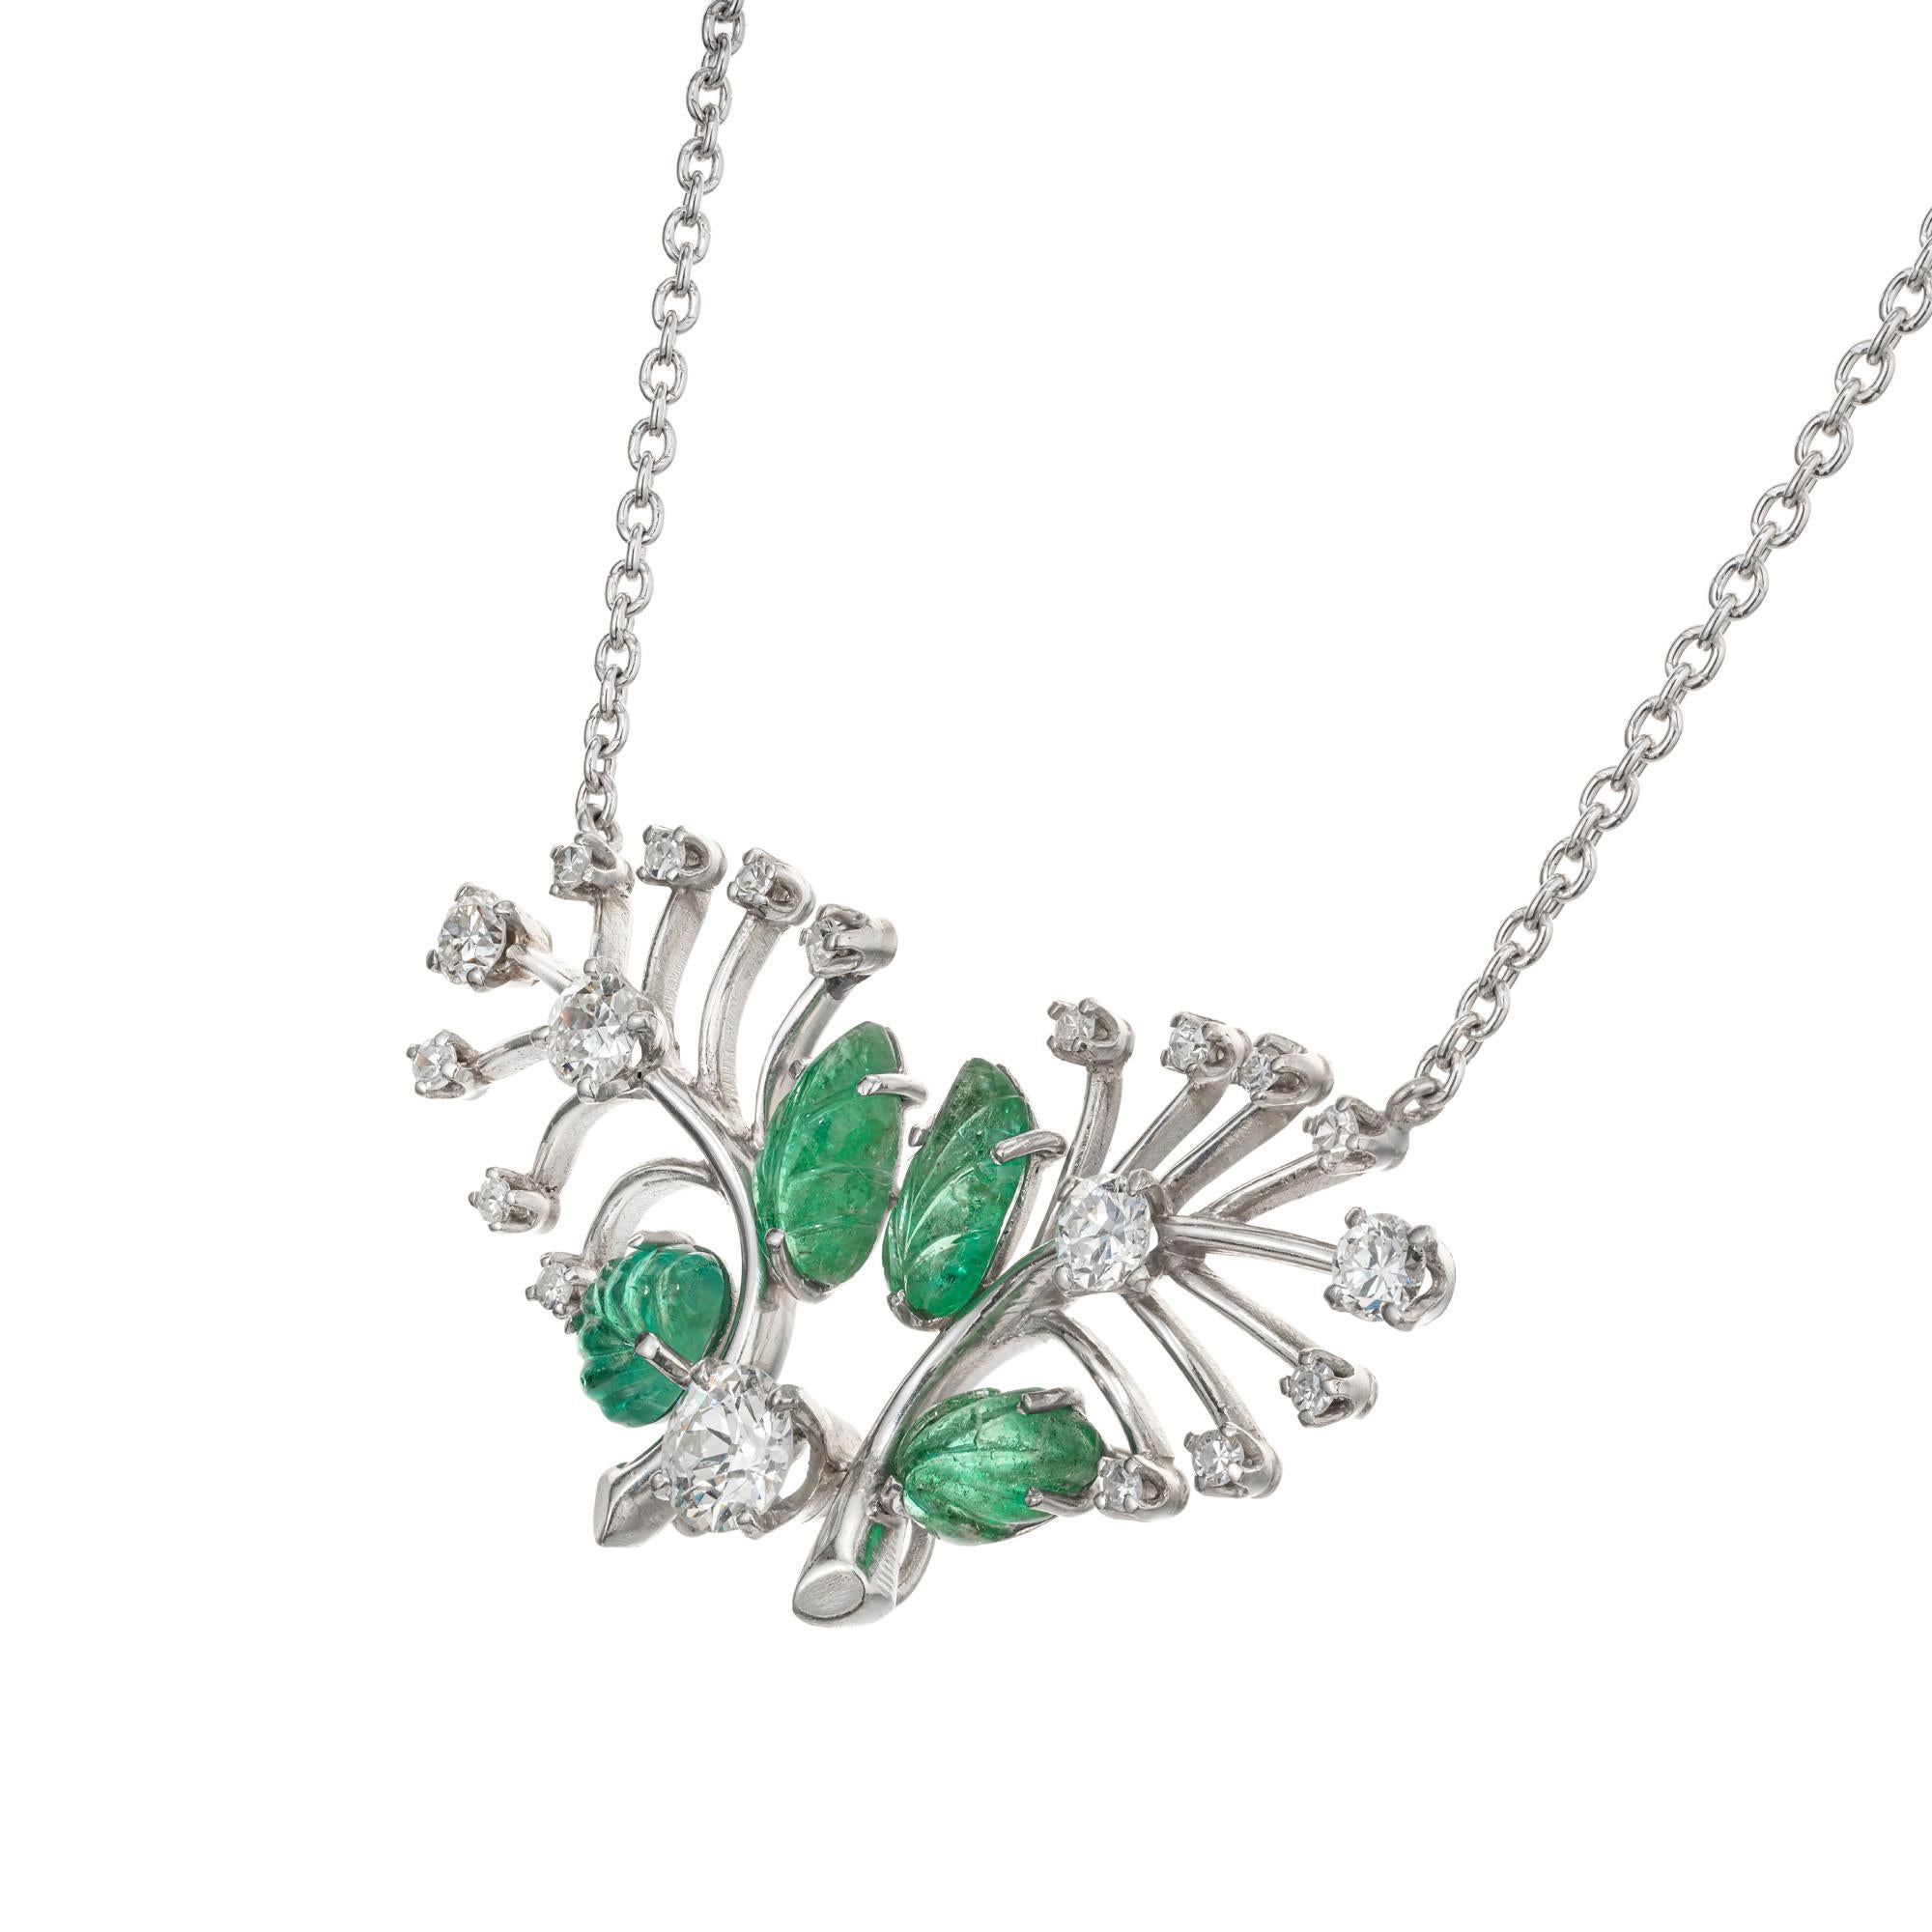 Wonderful 1960's carved bright green Emerald and diamond pendant. 4 carved leaf design emeralds set in a Platinum tree branch style setting with one Old European cut .55ct diamond, accented with 14 round Old European cut diamonds. 19.5 inch chain.